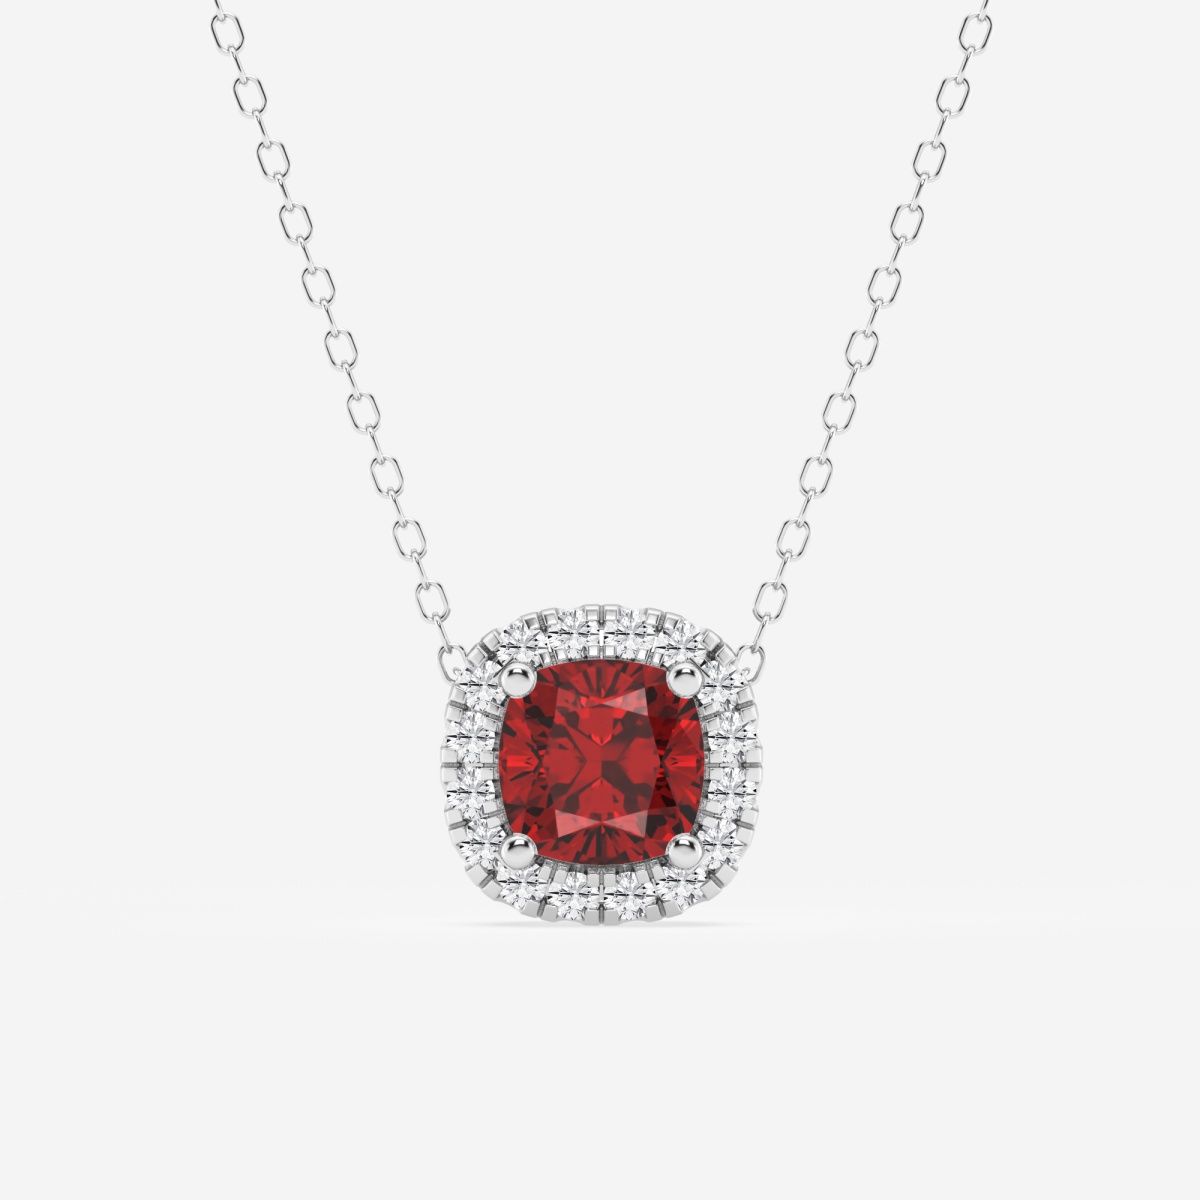 5.7x5.5 mm Cushion Cut Created Ruby and 1/5 ctw Round Lab Grown Diamond Halo Pendant with Adjustable Chain